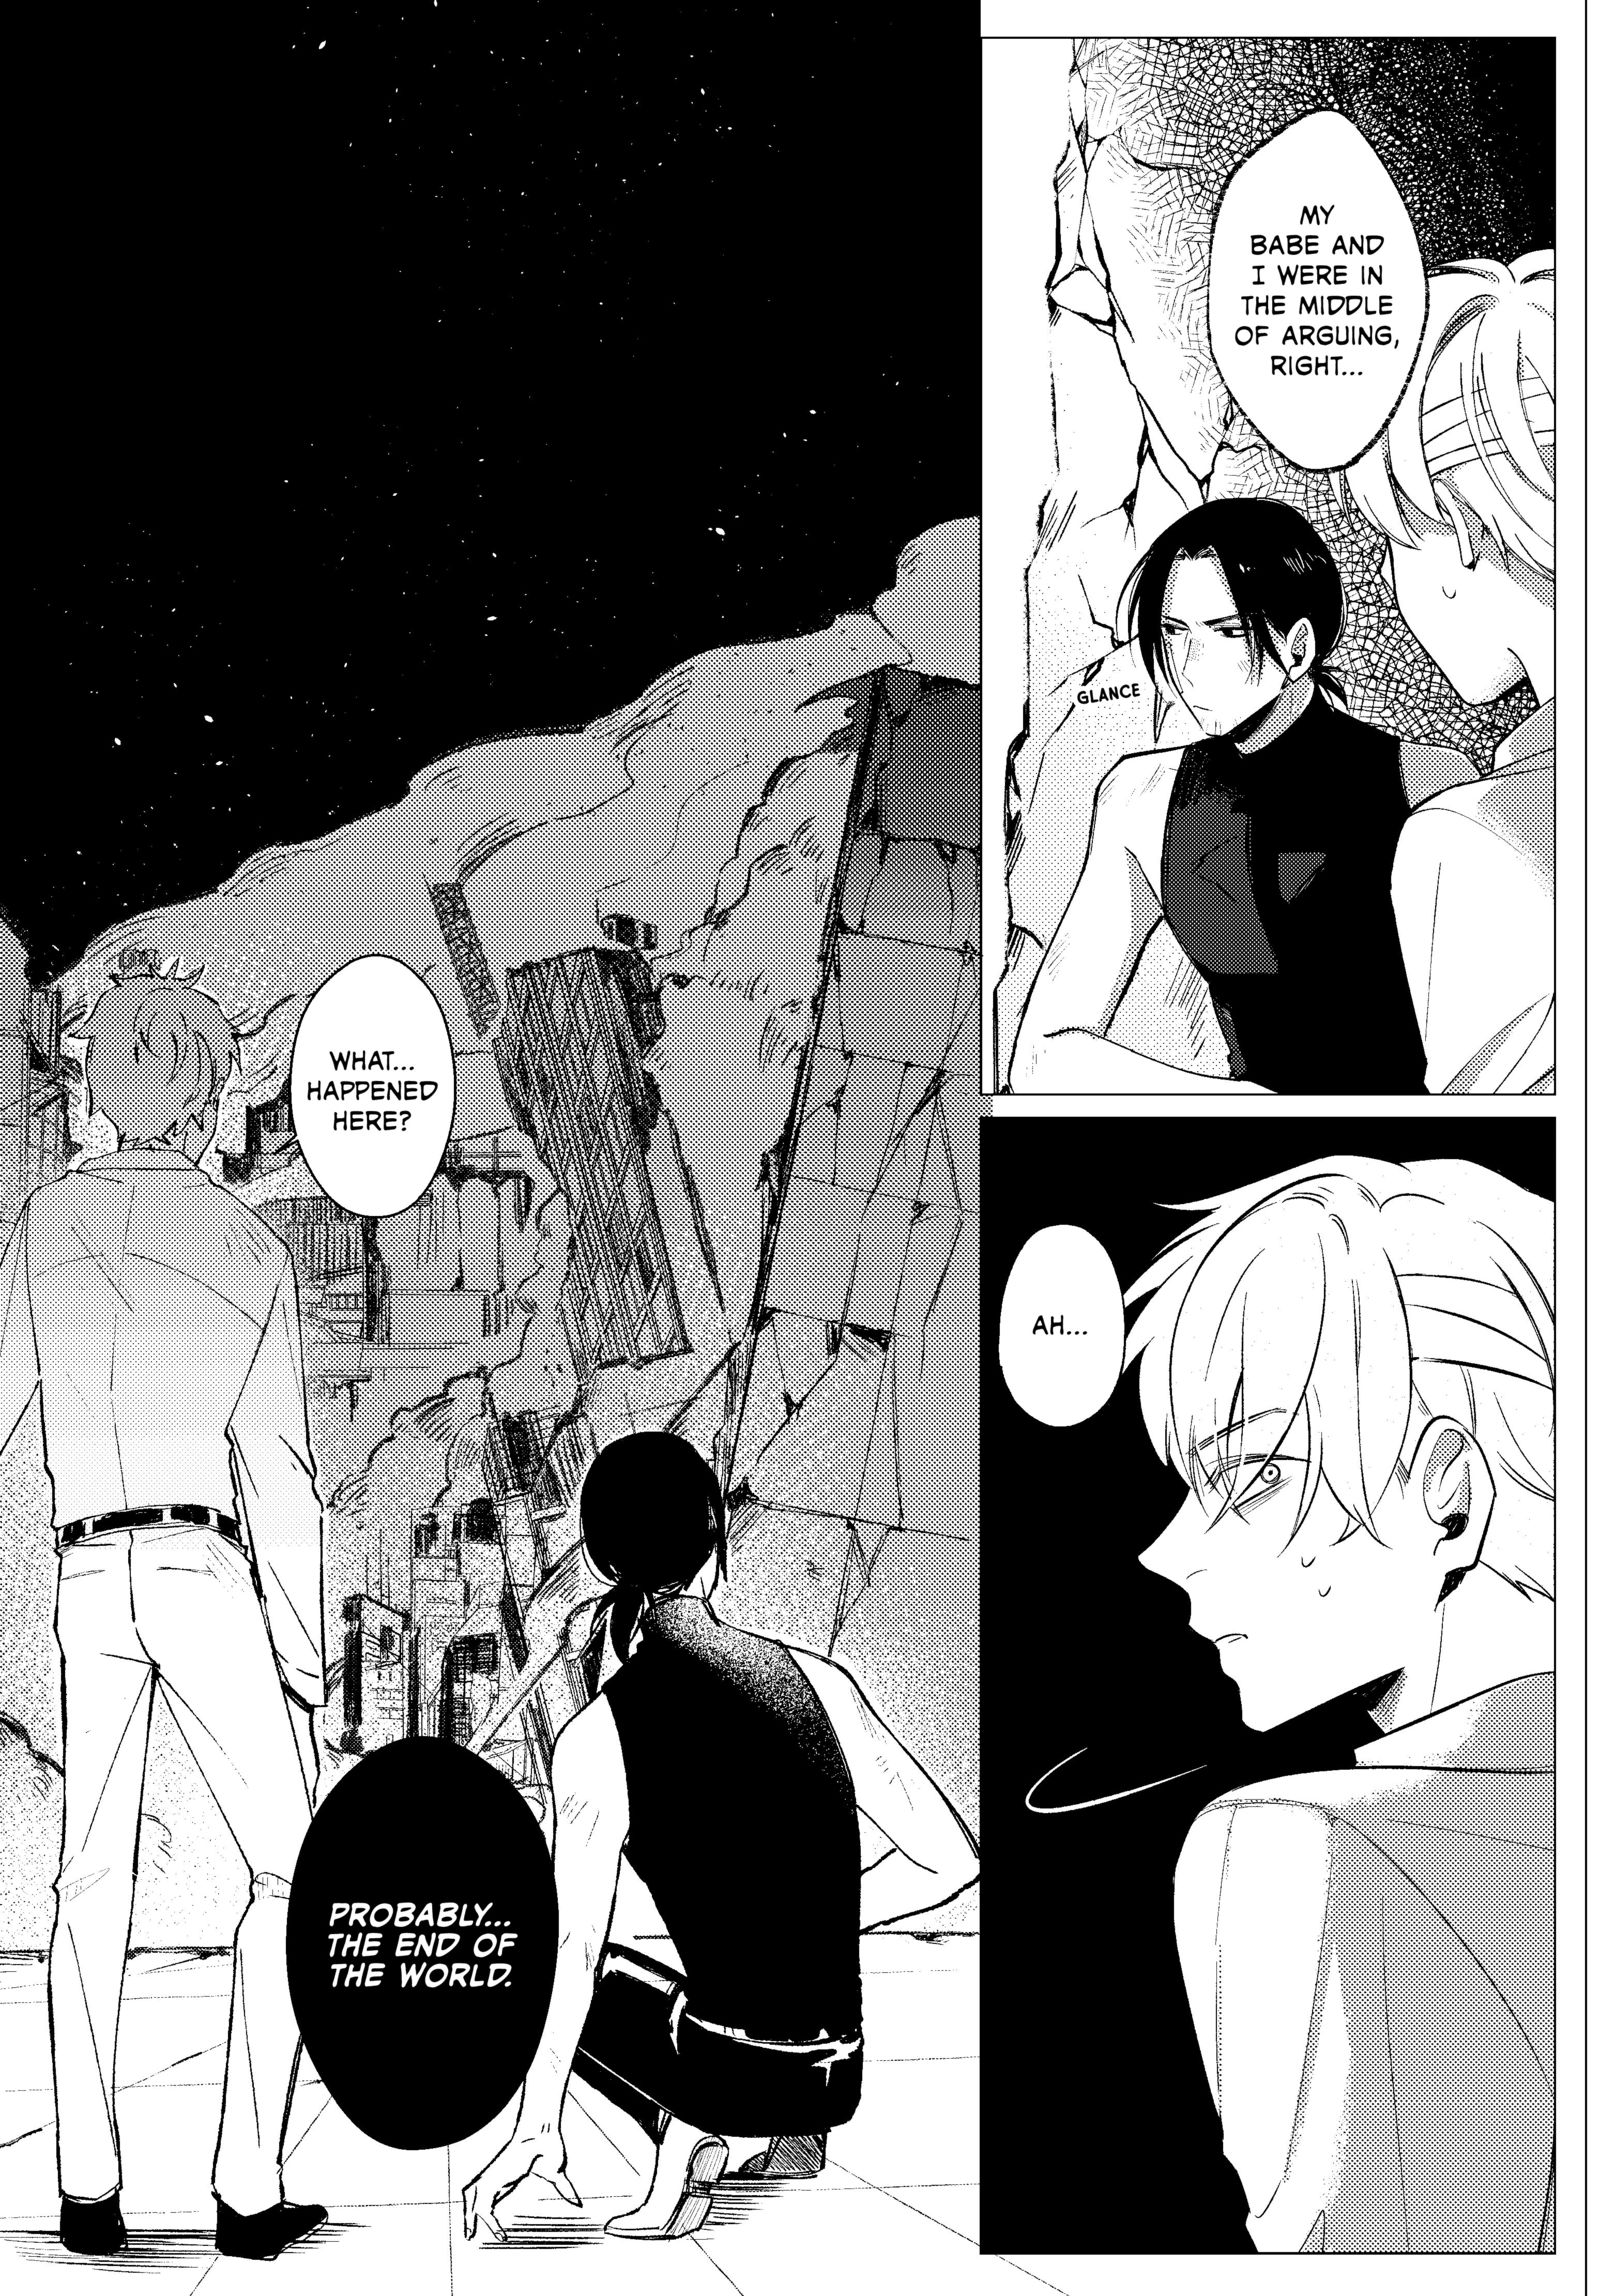 At the end of the world, I still want to be with you vol.1 ch.1